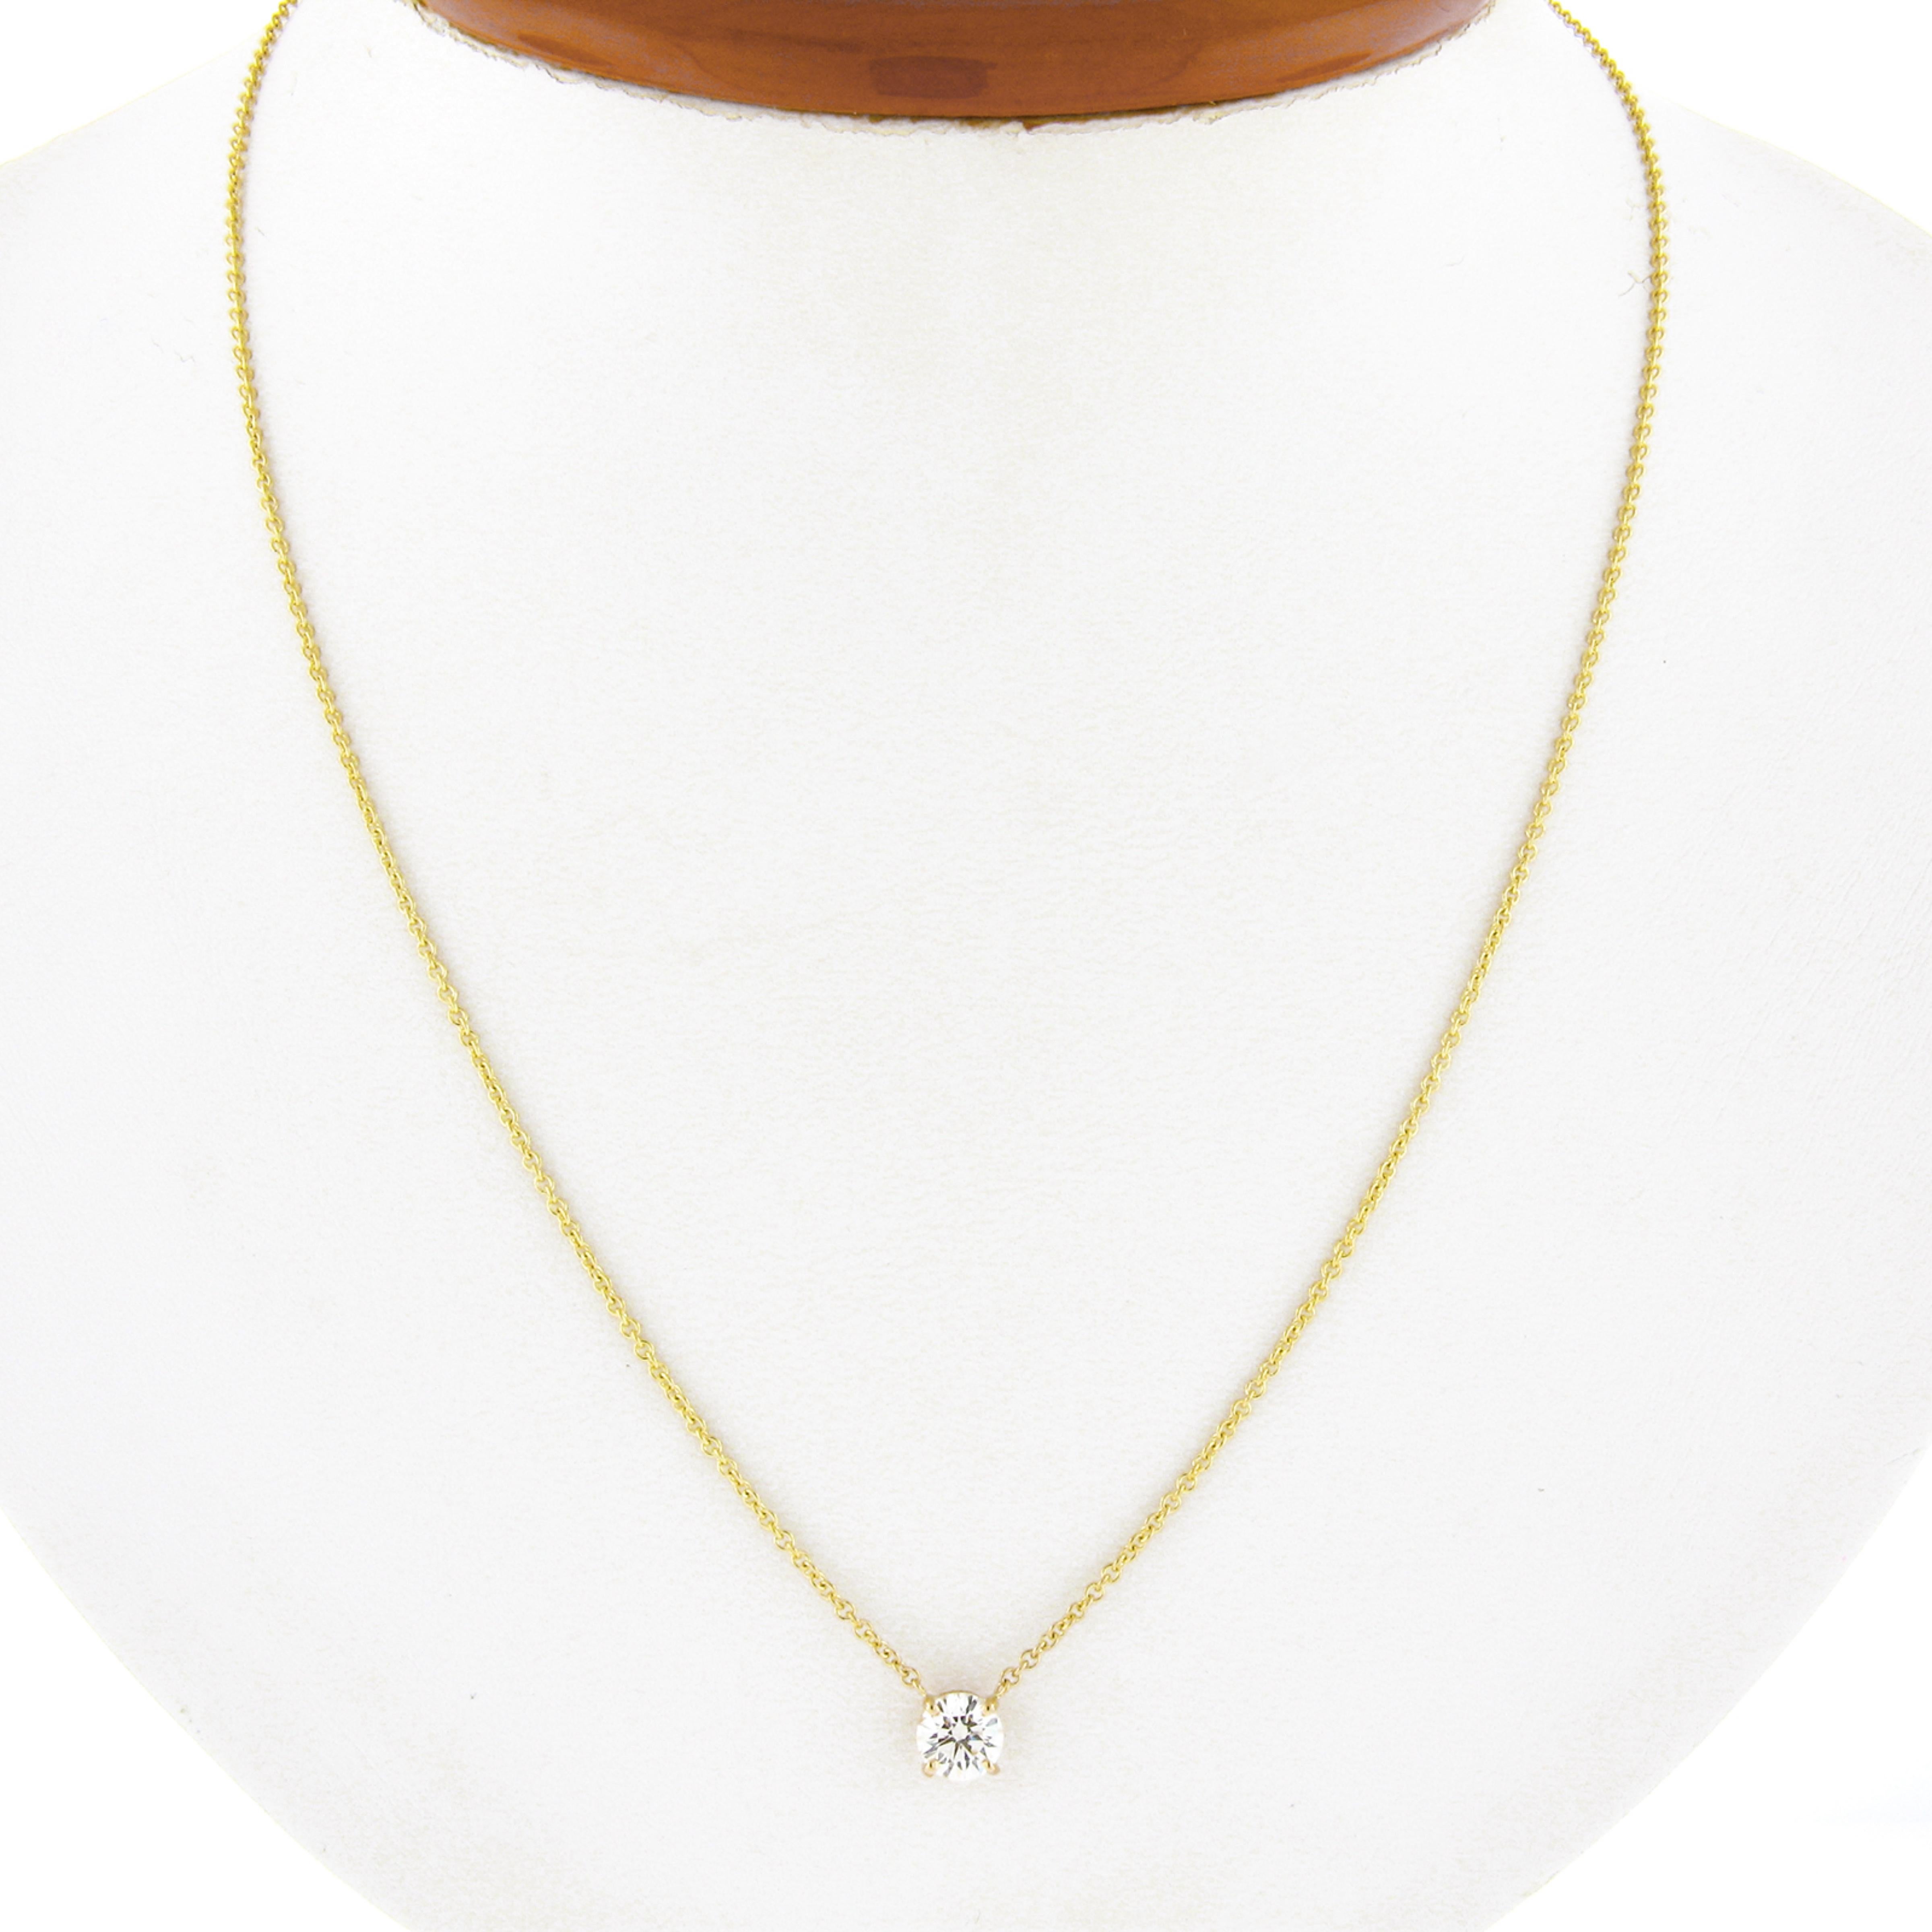 You are looking at a simple and classically styled diamond solitaire pendant that is newly crafted in solid 14k yellow gold. The round brilliant cut diamond on this pendant is neatly prong set in an open basket and weighs exactly 0.58 carats,